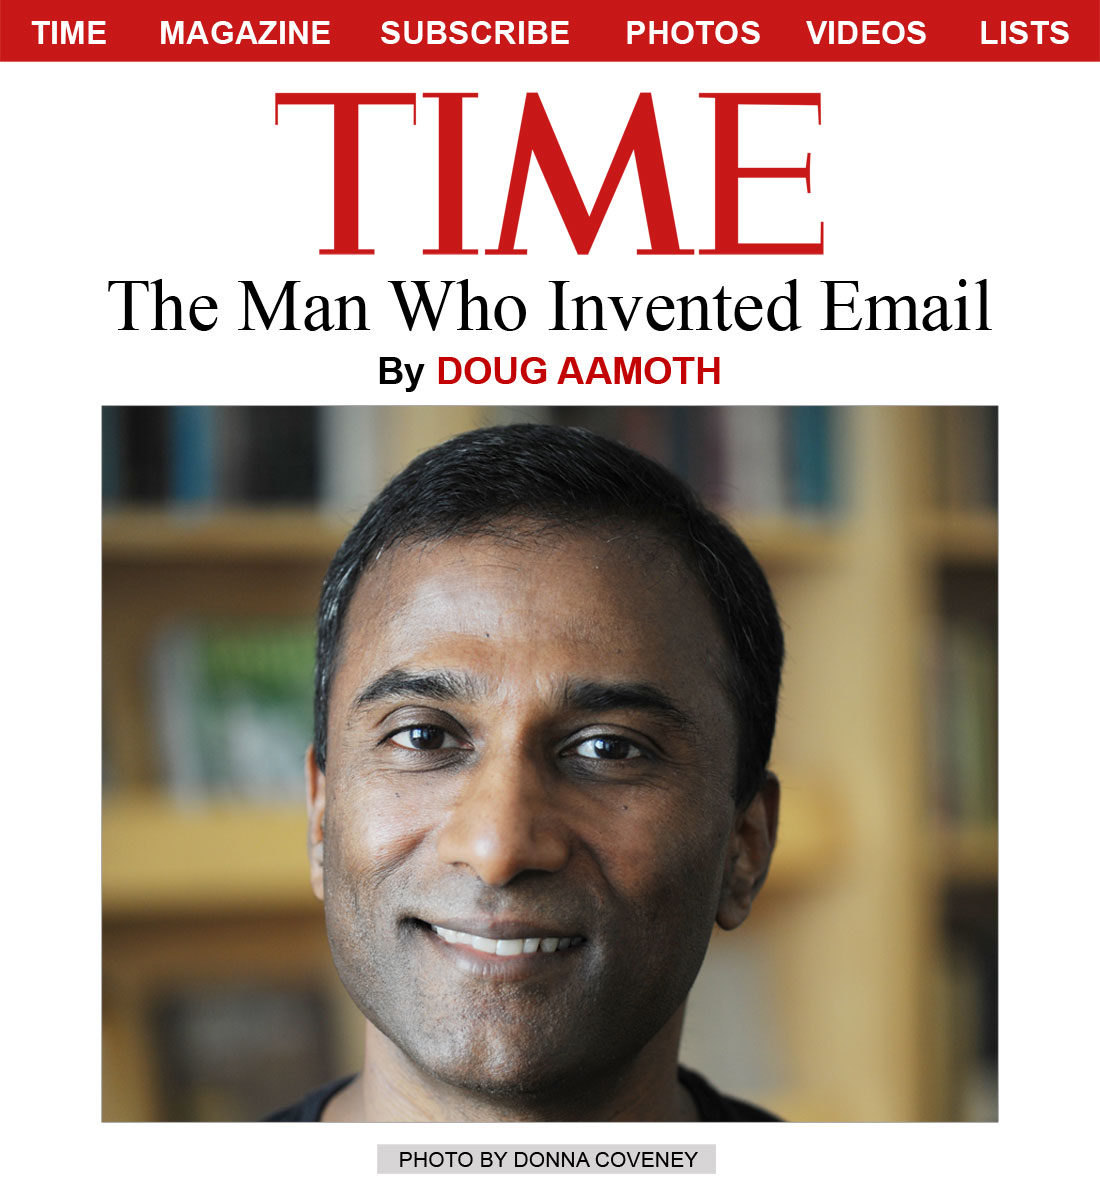 The man who invented email Dr Shiva